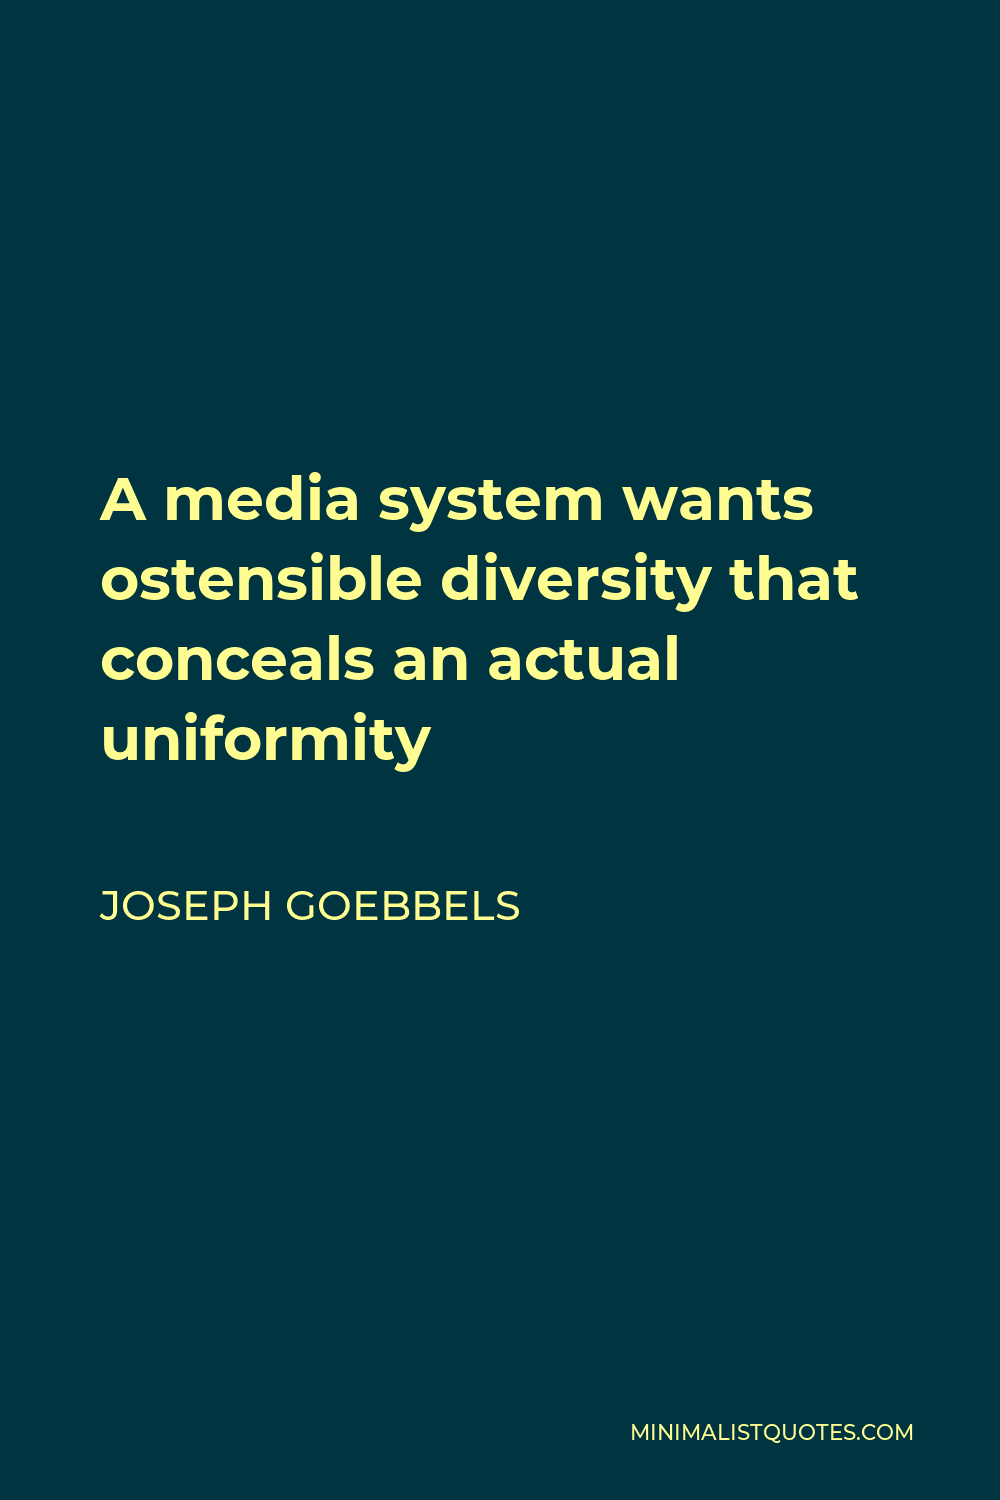 Joseph Goebbels Quote - A media system wants ostensible diversity that conceals an actual uniformity